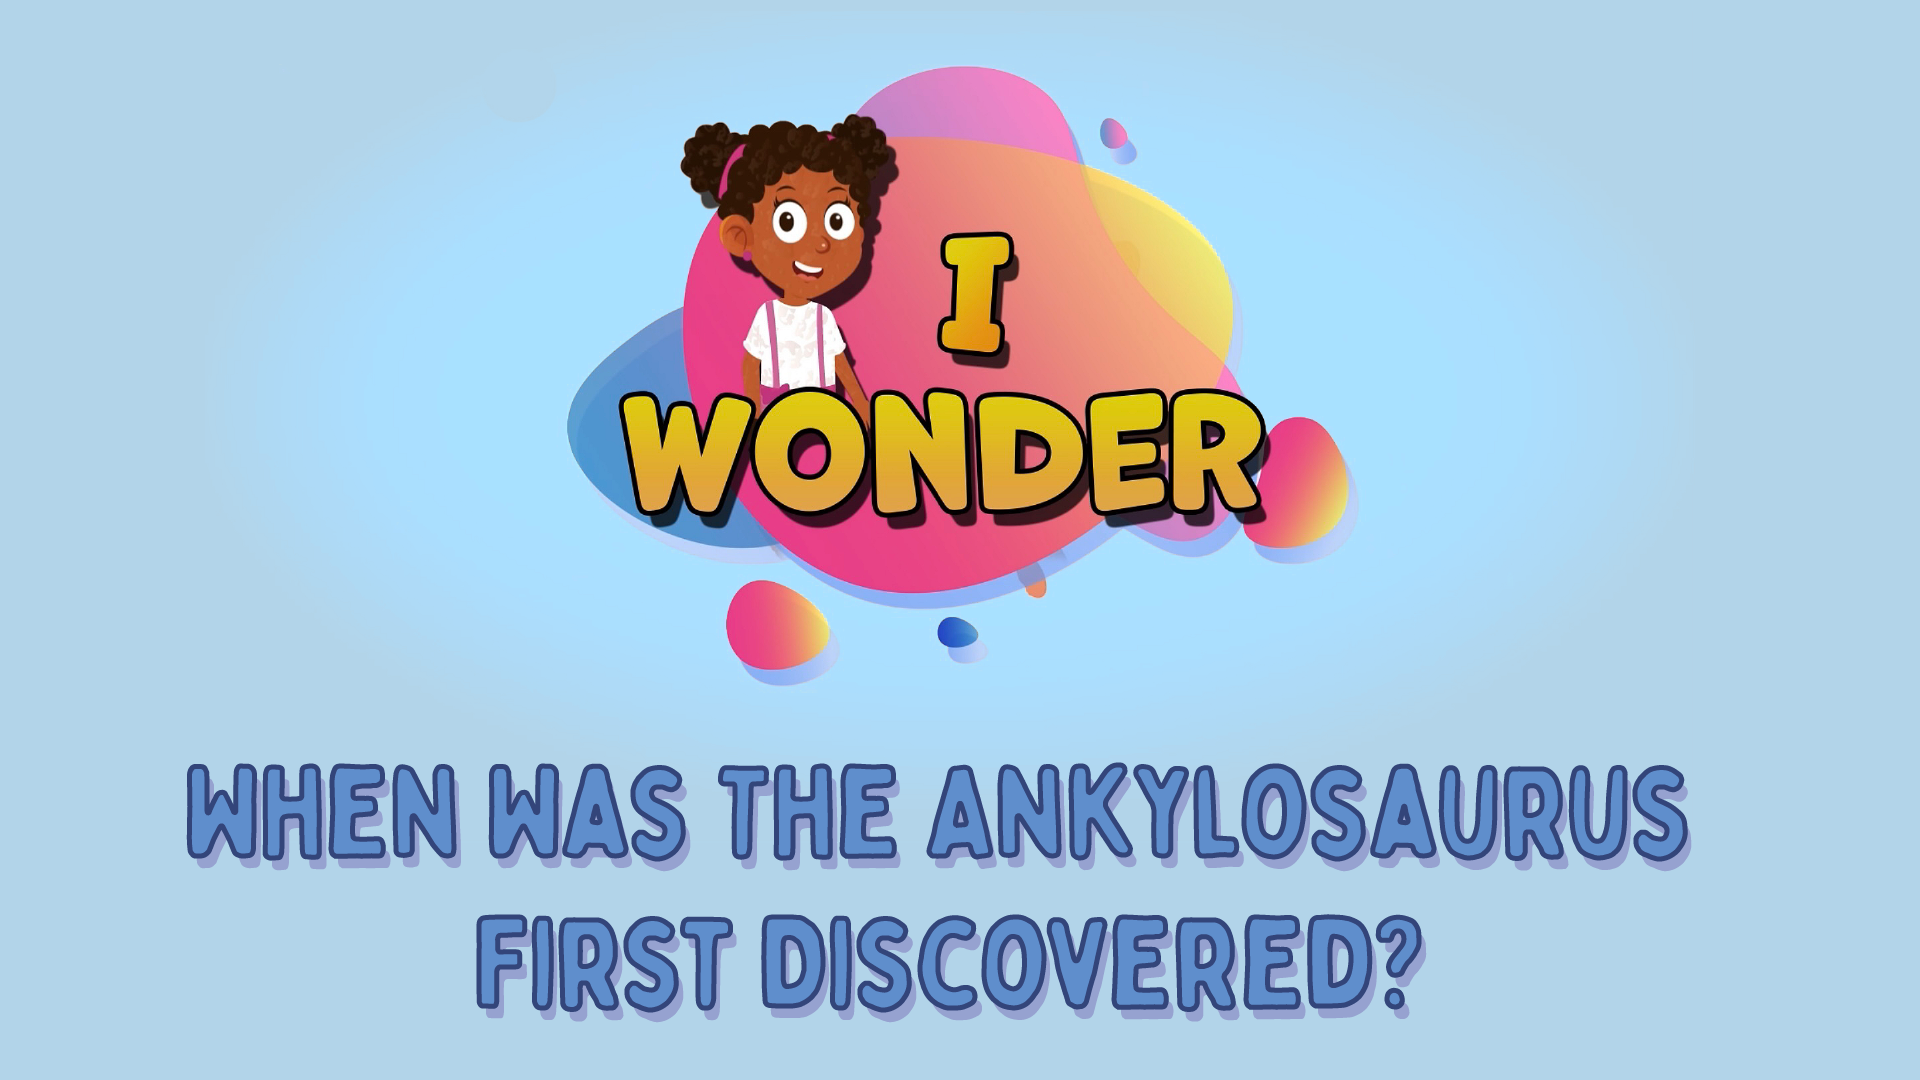 When Was The Ankylosaurus First Discovered?